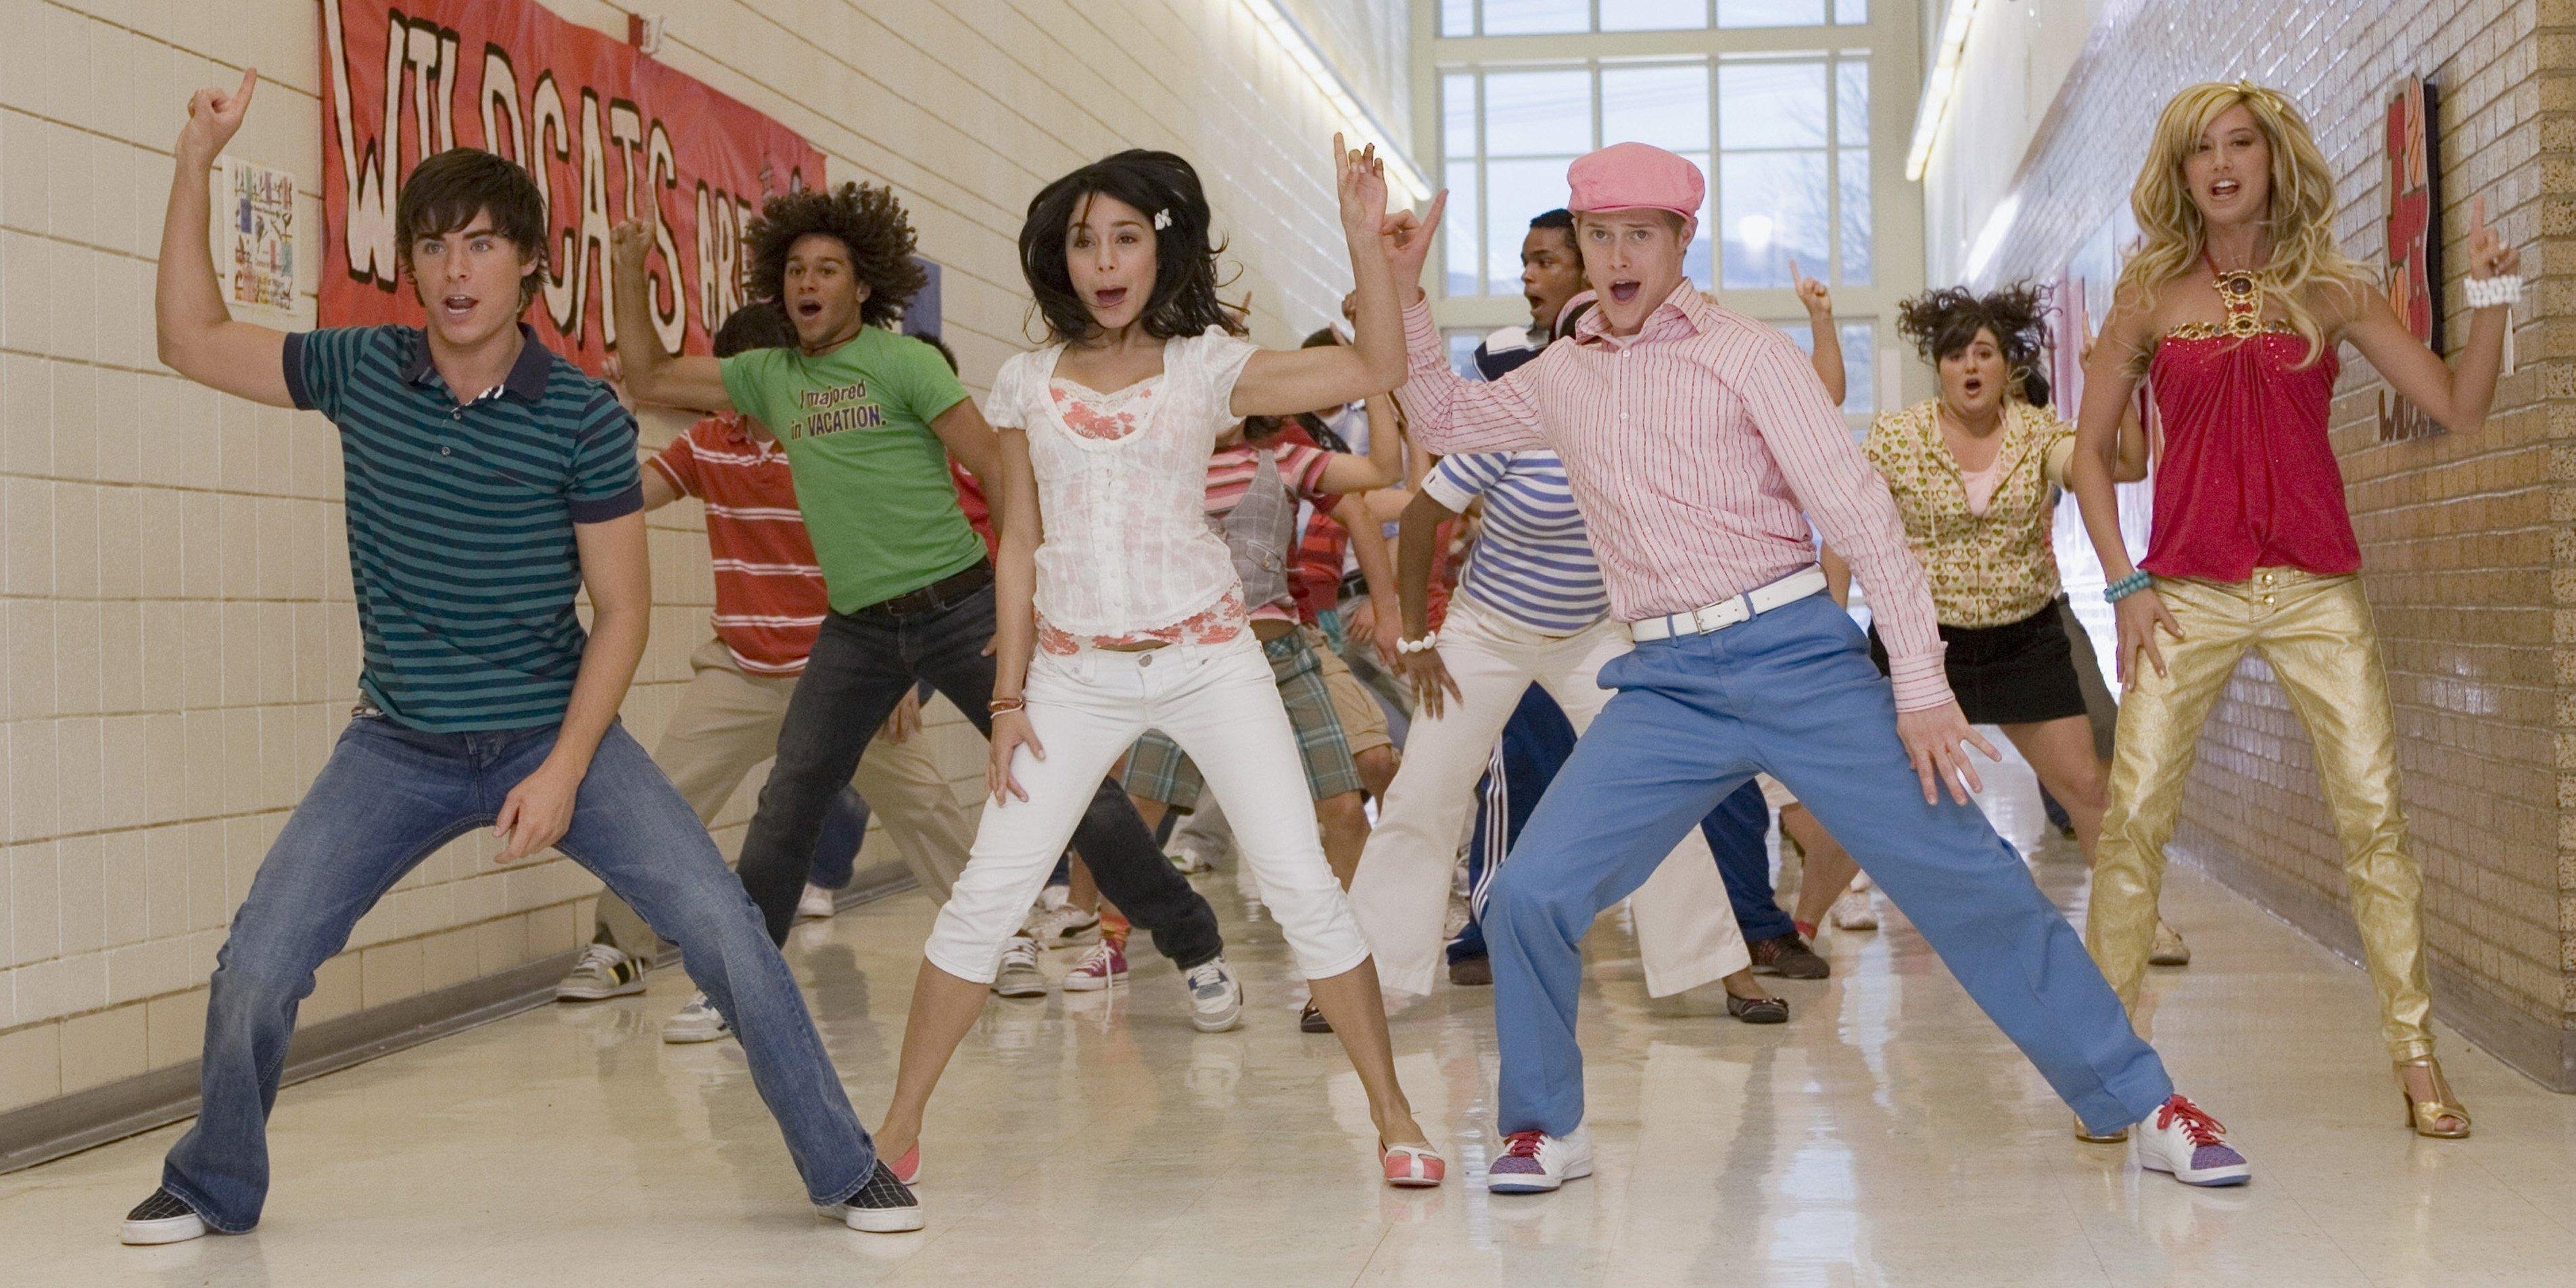 The cast of High School Musical sings in the hallway